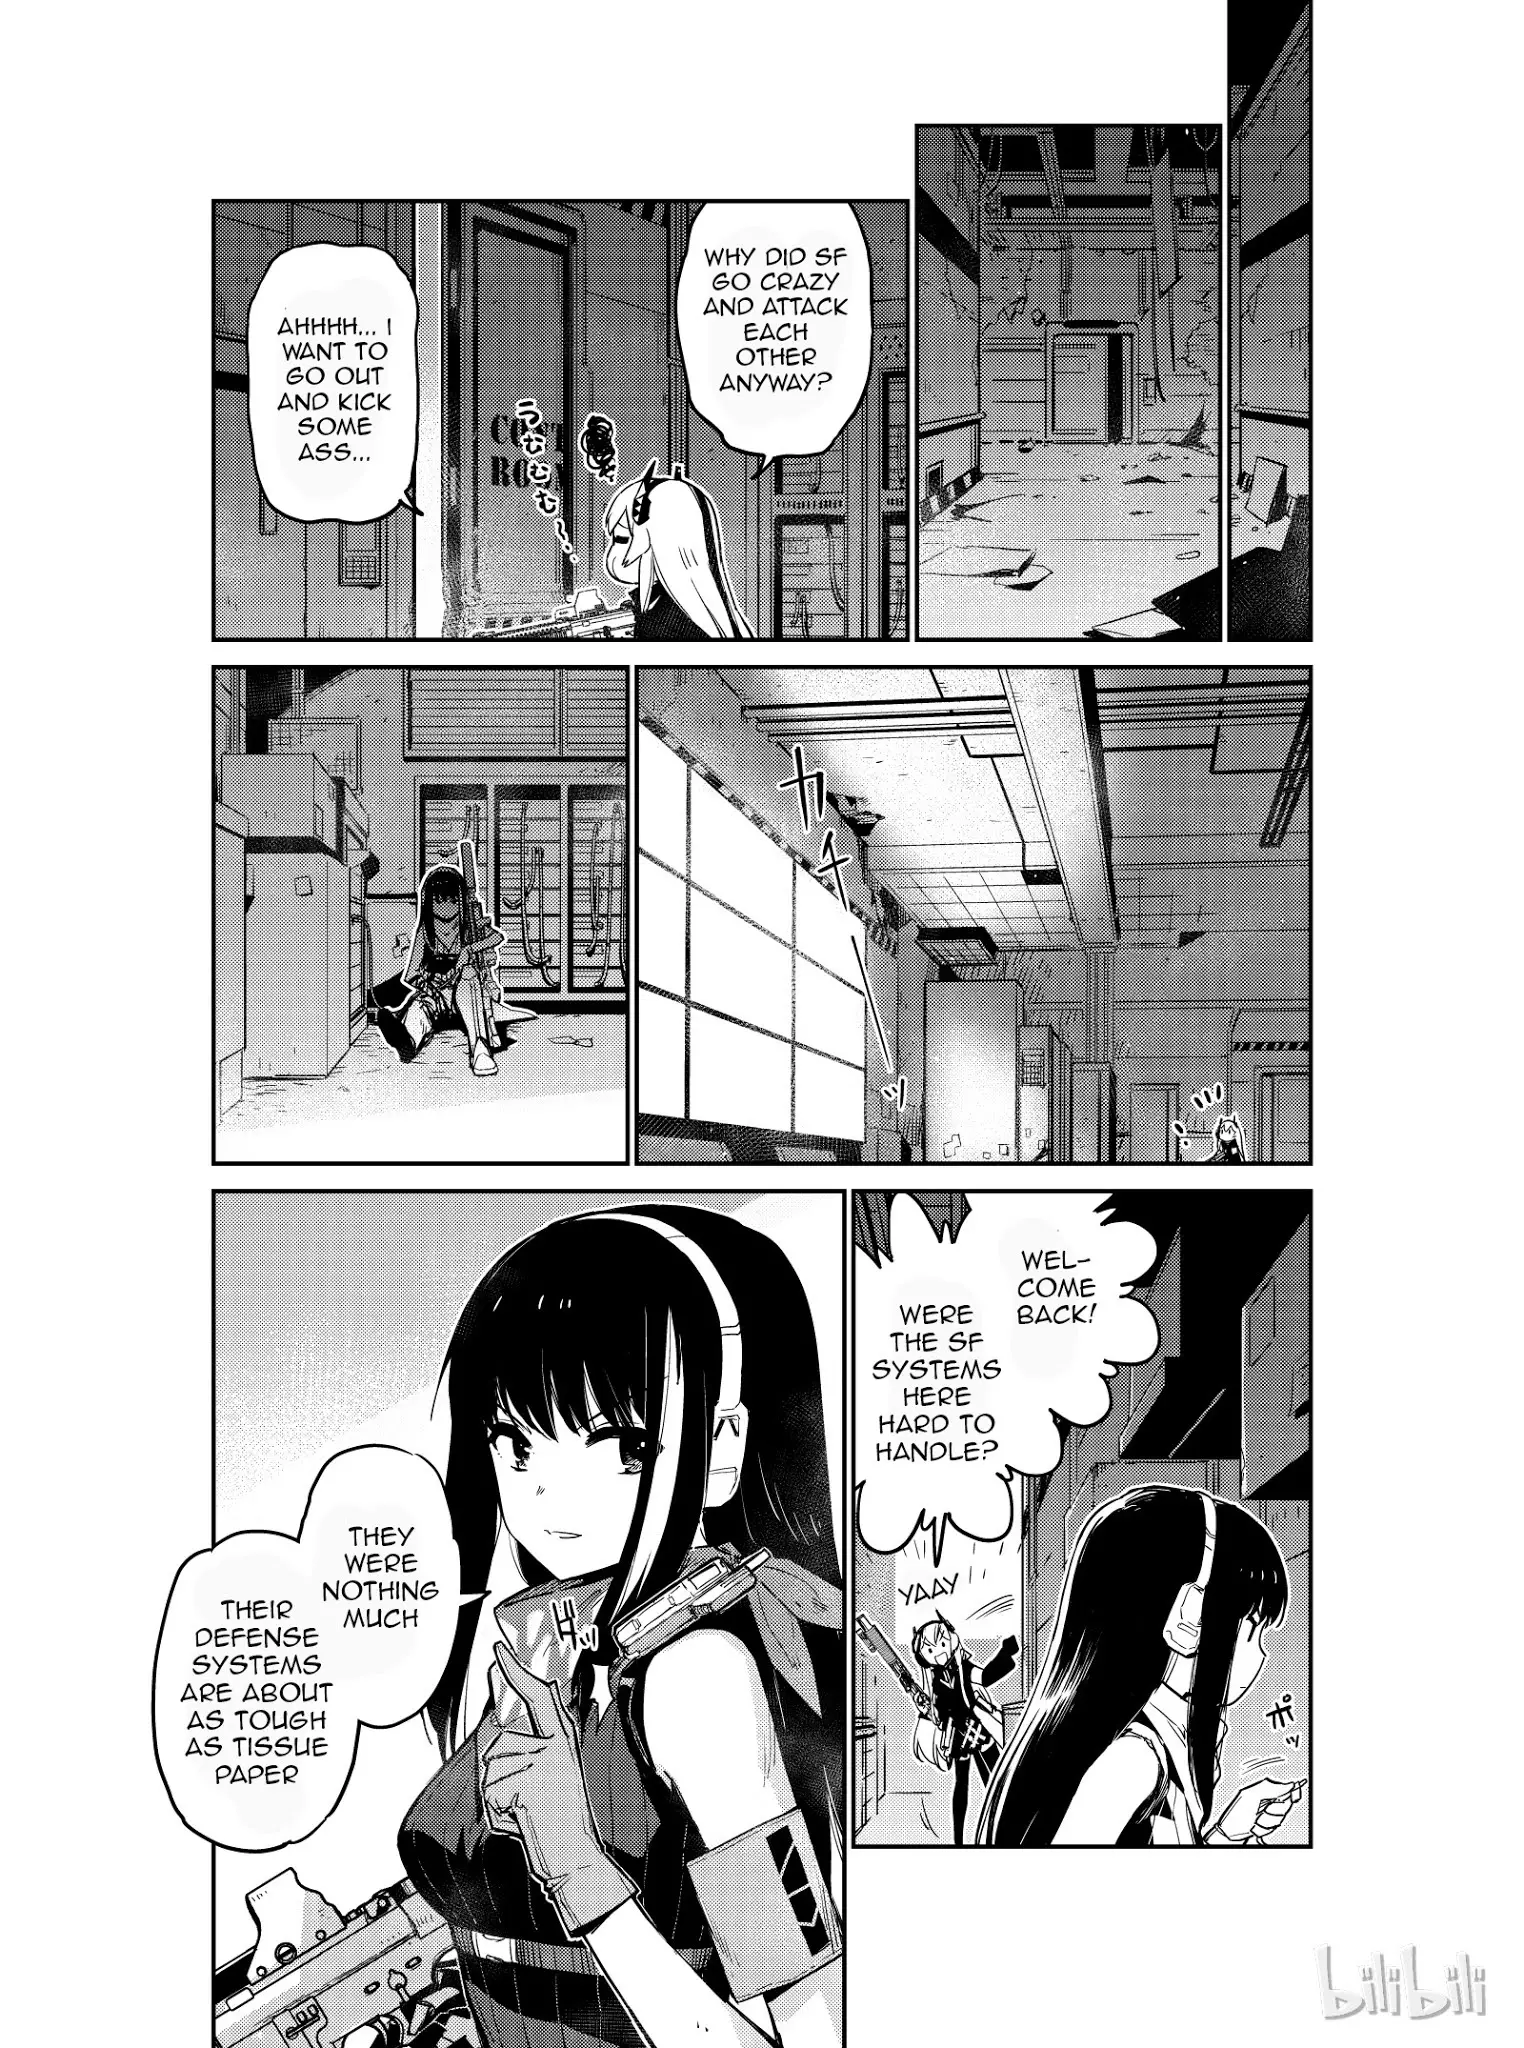 Girls' Frontline - 7 page 14